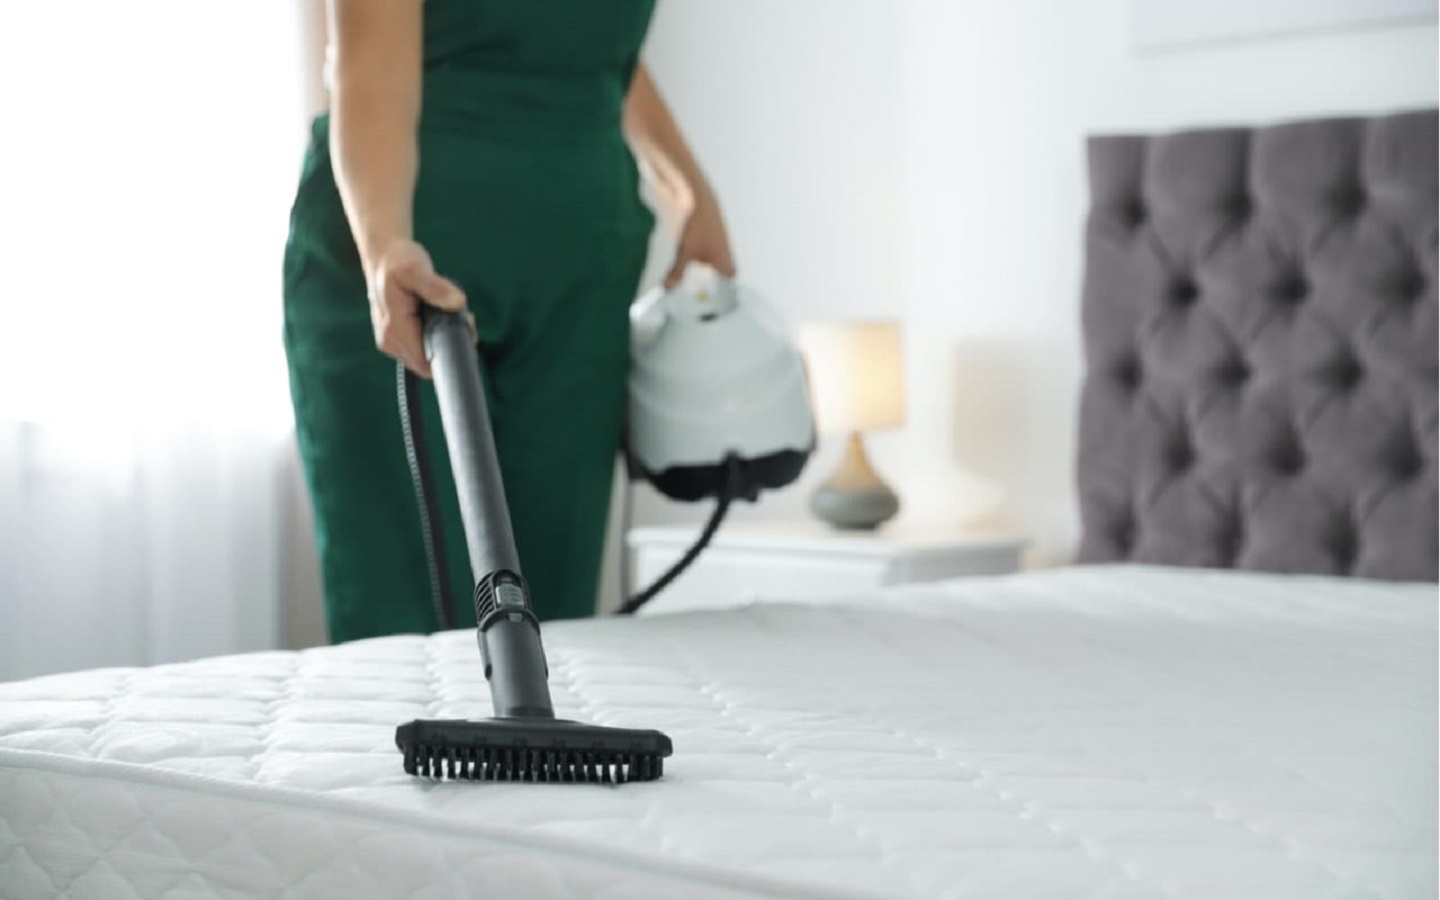 How to Clean a Mattress - 5 Effective Mattress Cleaning Methods